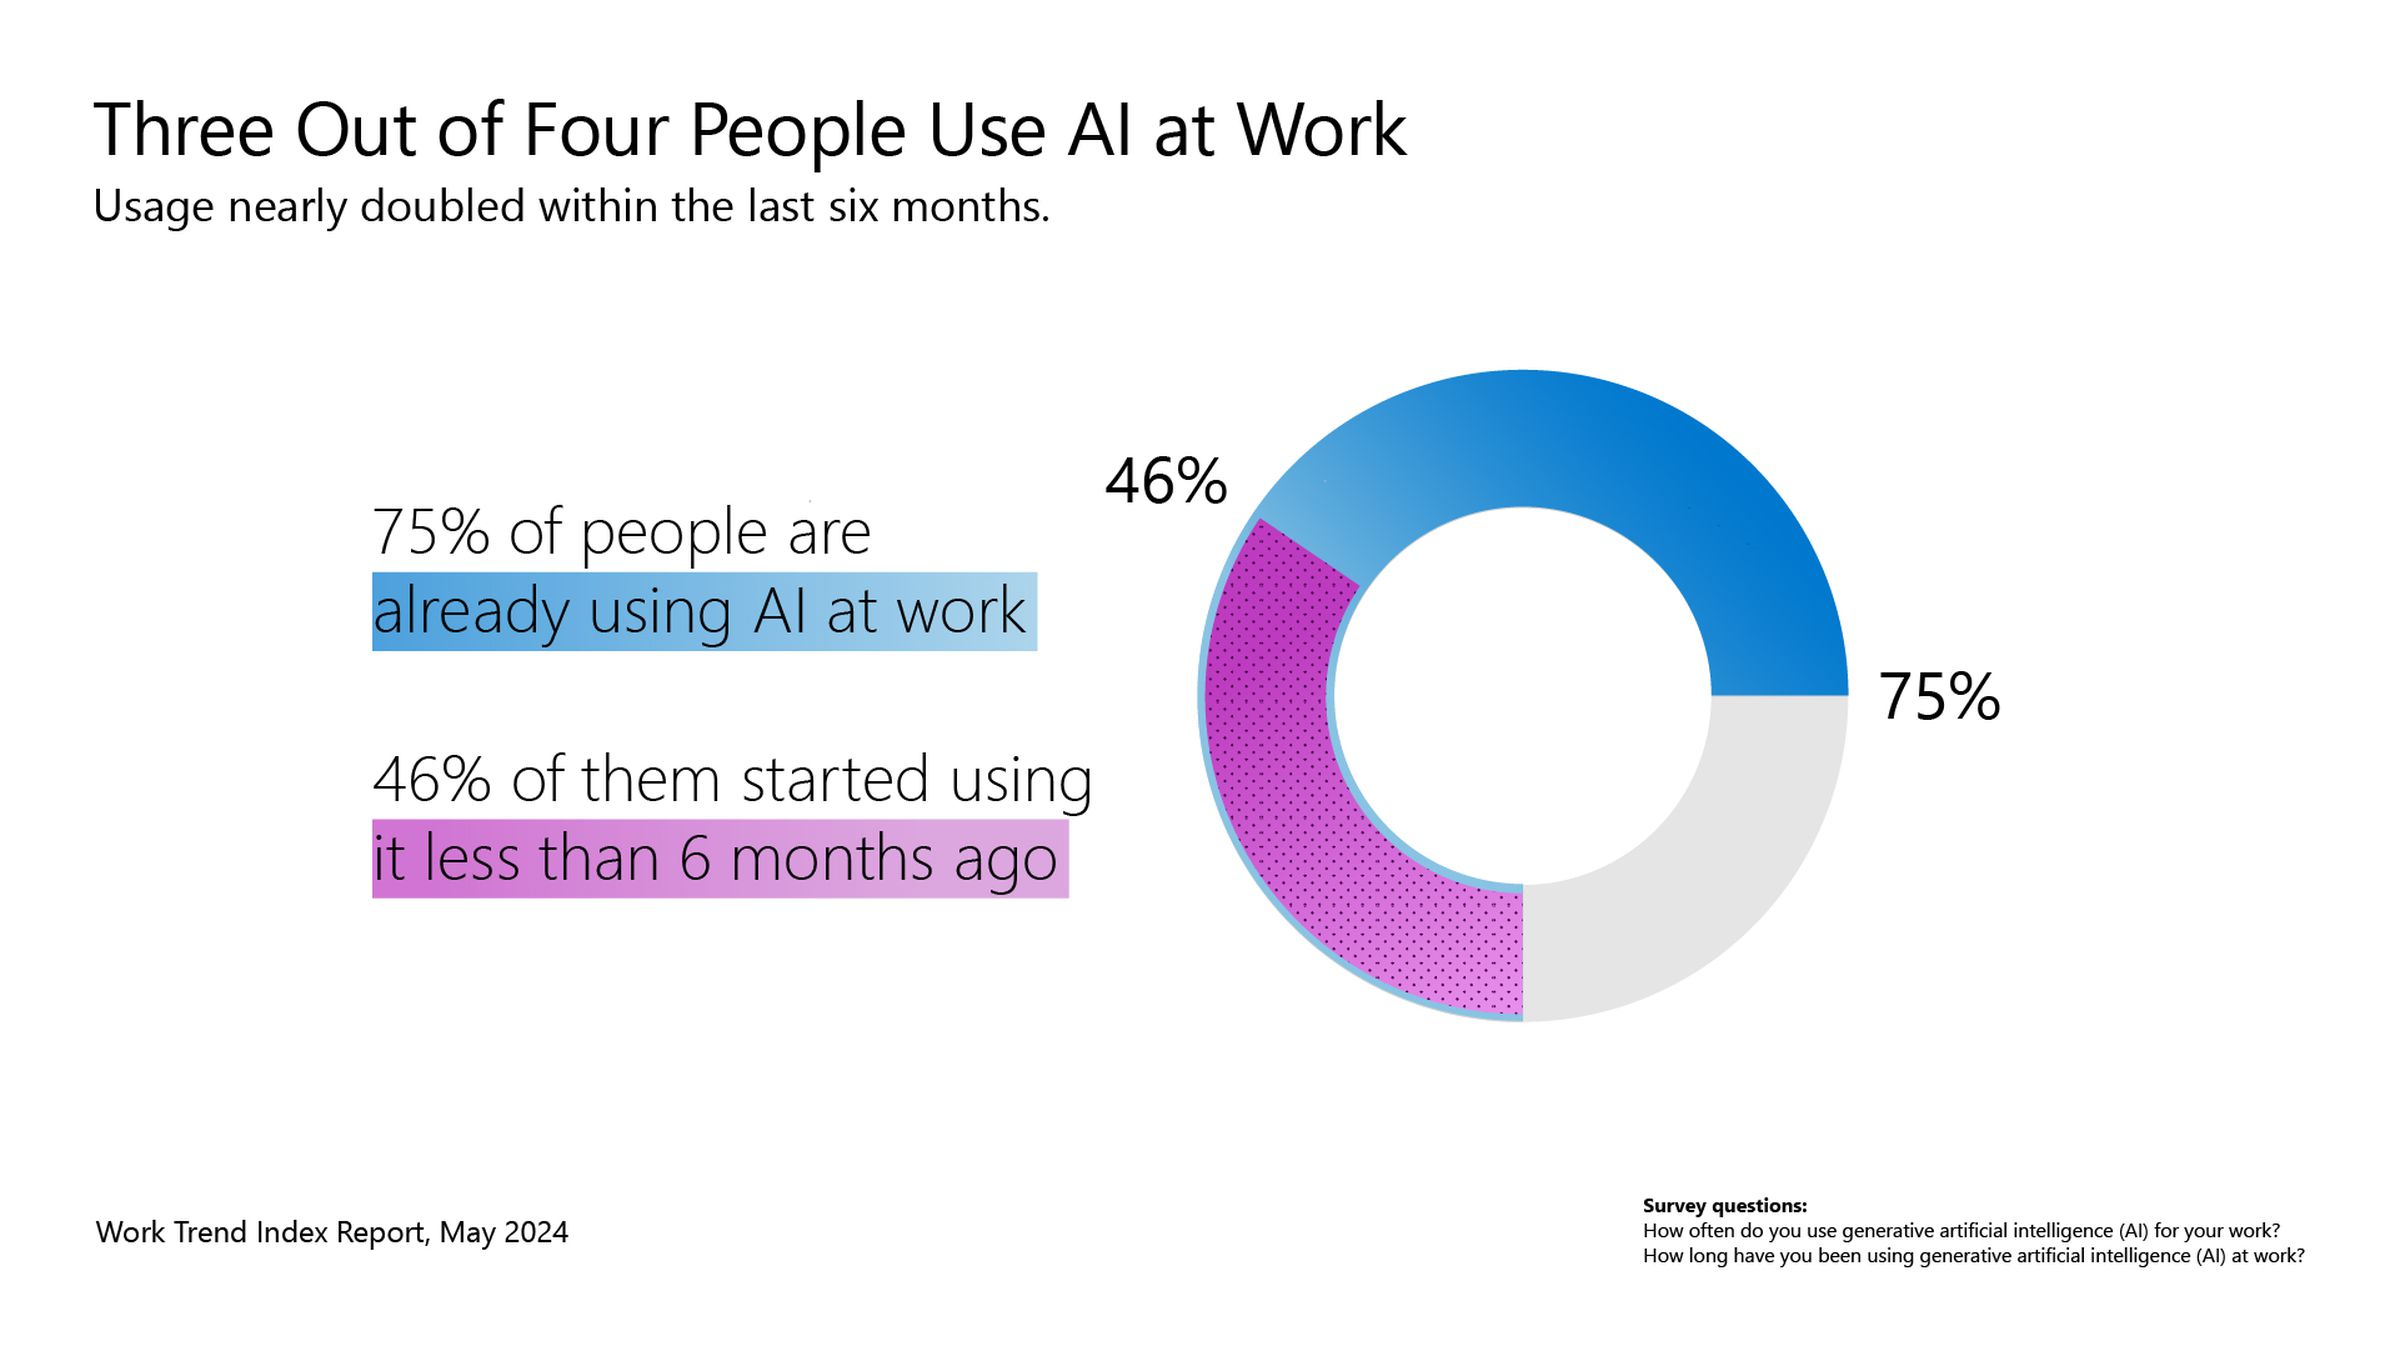 Microsoft says 75 percent of people are already using AI at work.